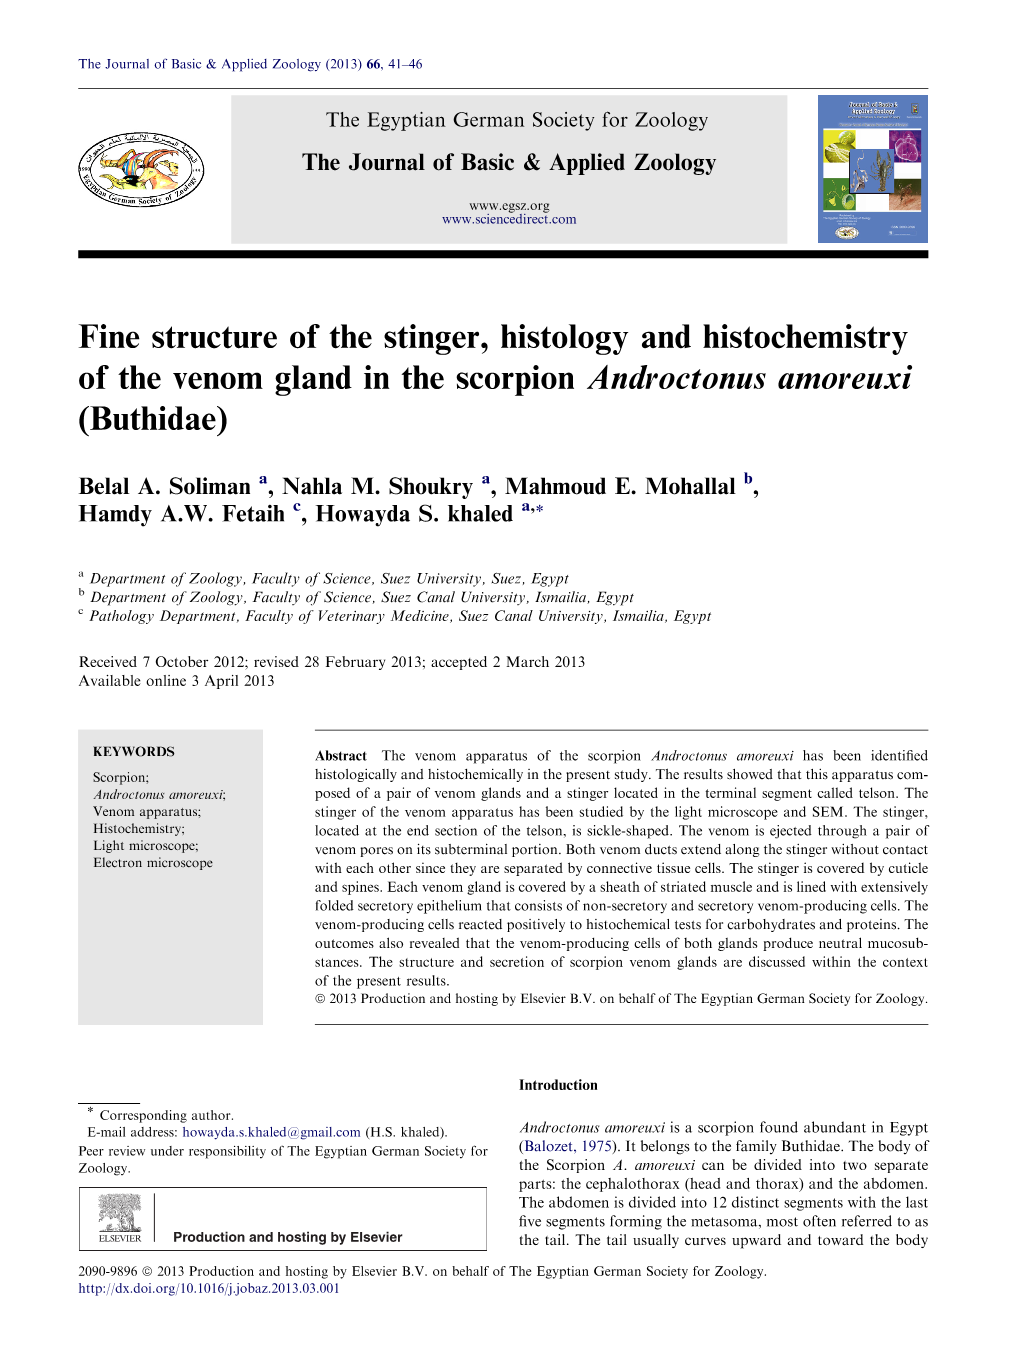 Fine Structure of the Stinger, Histology and Histochemistry of the Venom Gland in the Scorpion Androctonus Amoreuxi (Buthidae)